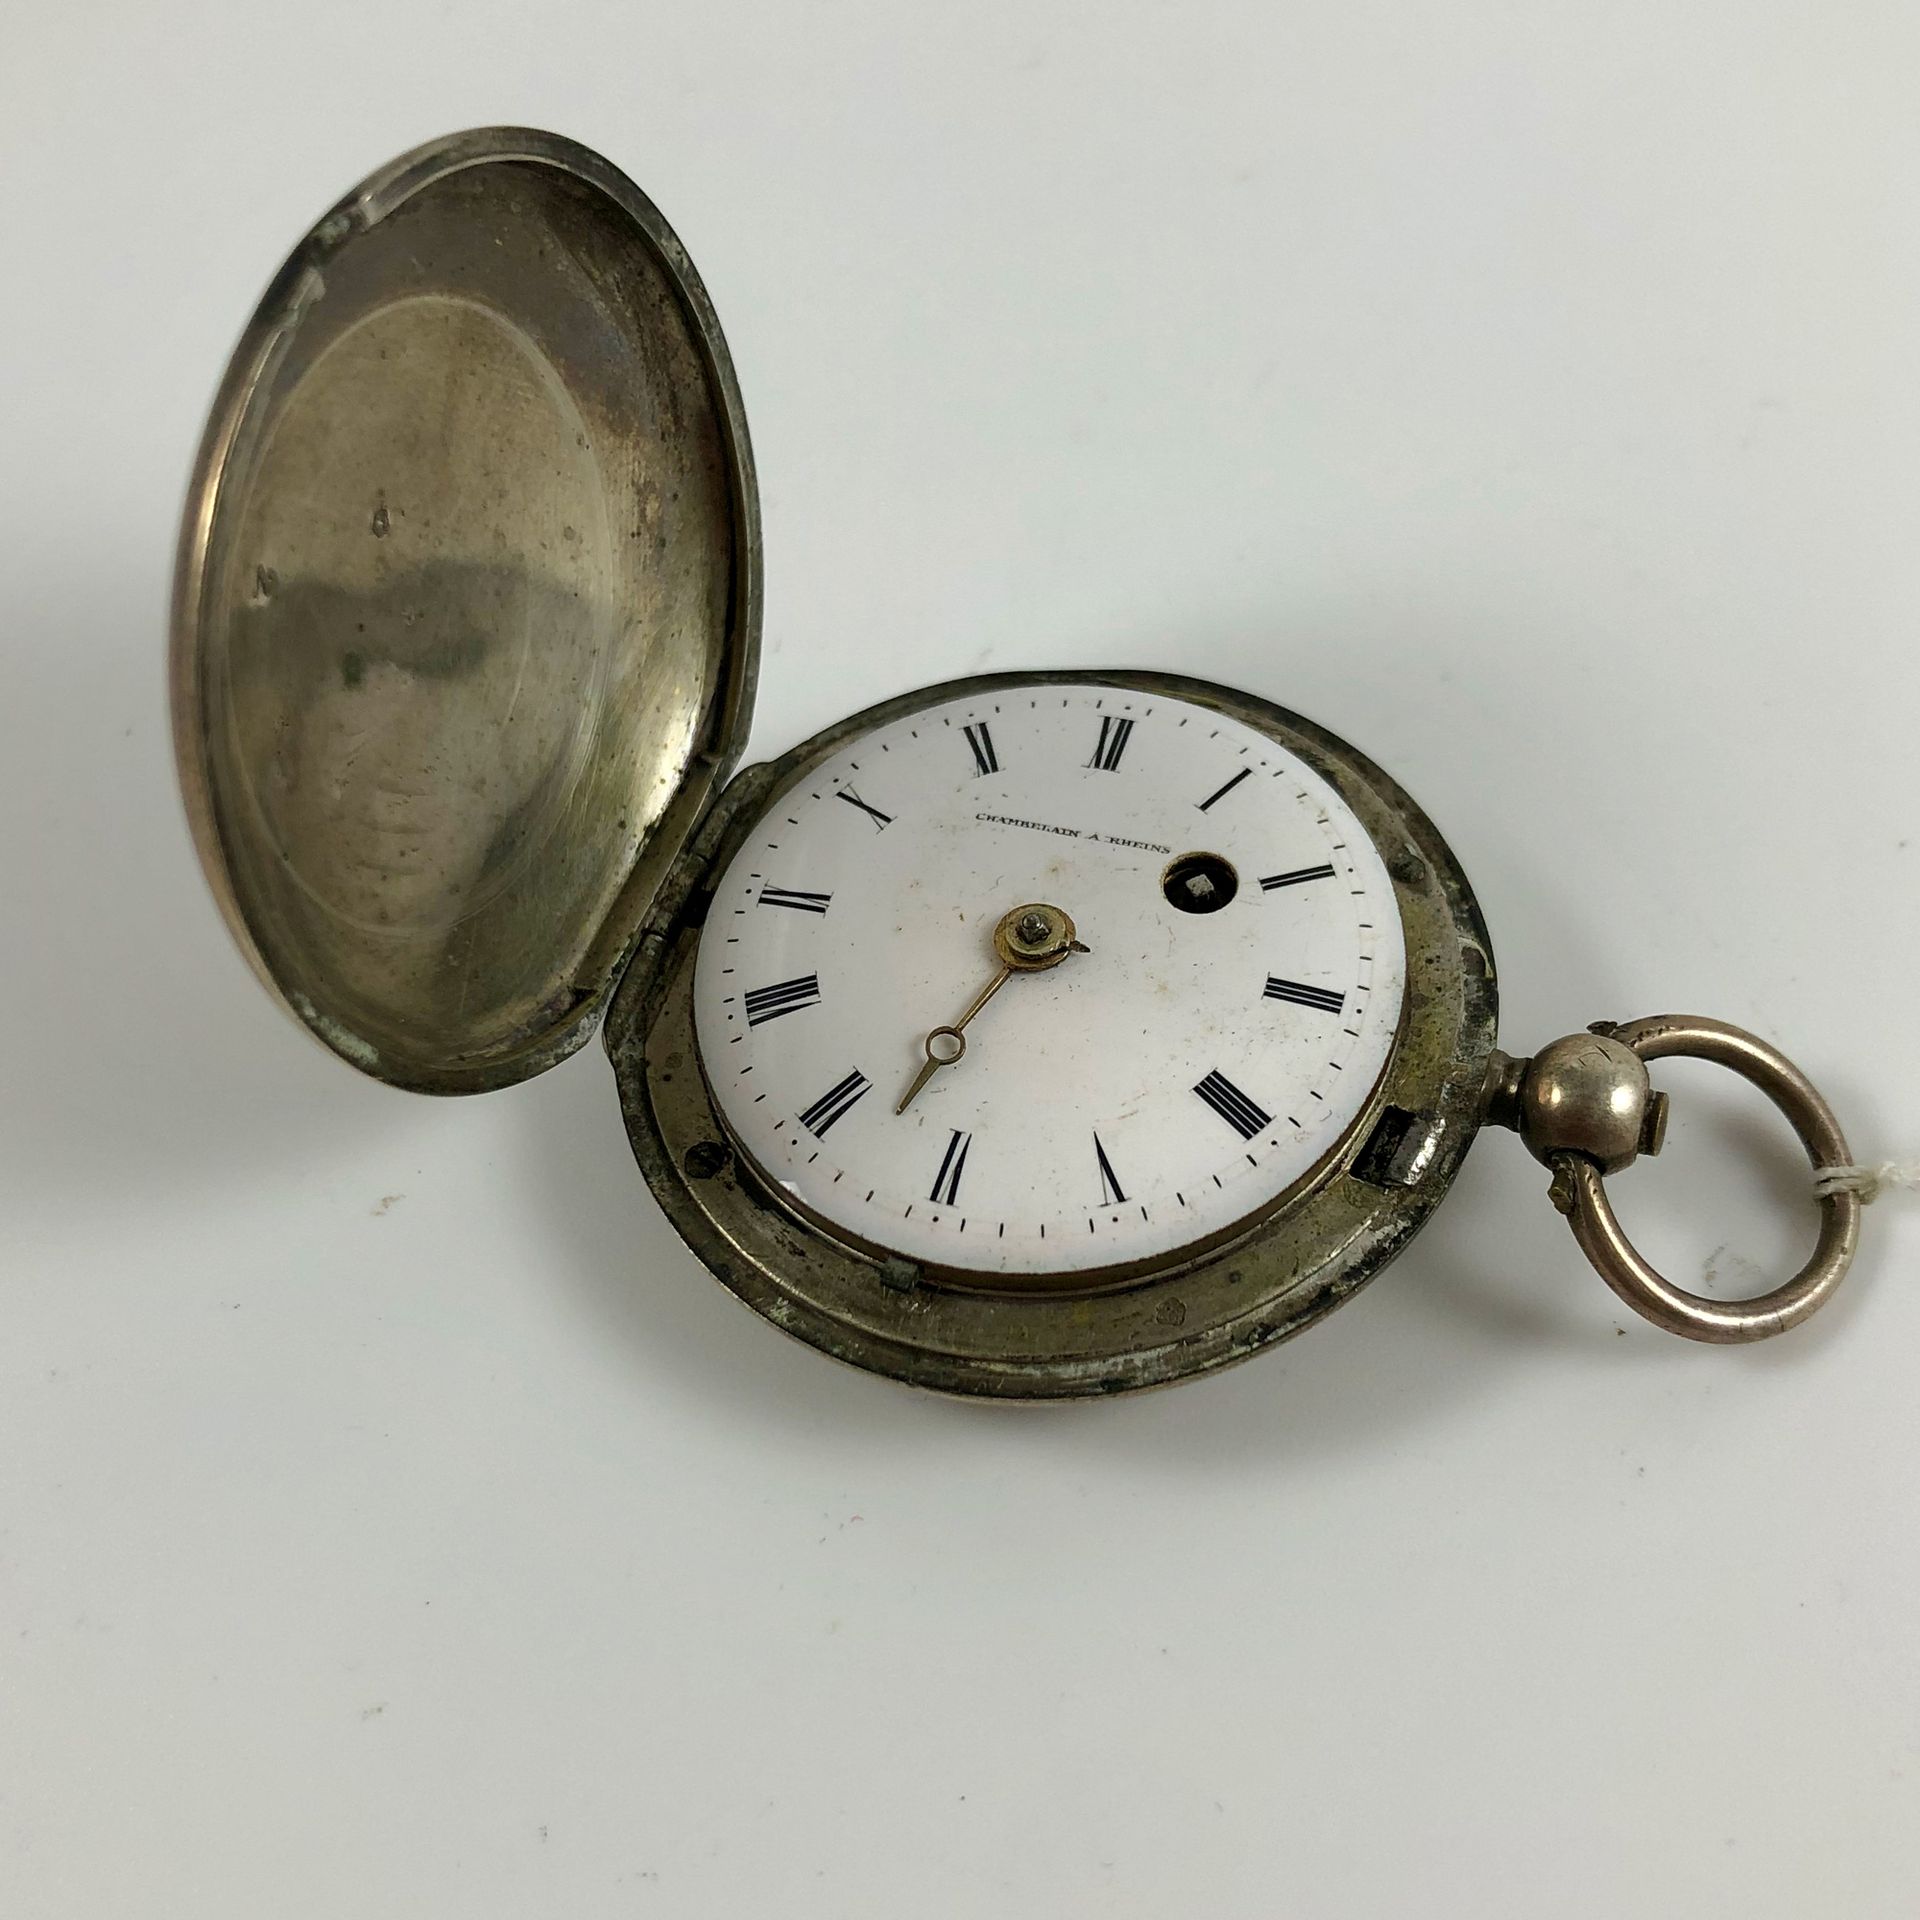 Null 
CHAMBELAIN A RHEINS

Pocket watch with cock and clapper

18th/19th century&hellip;